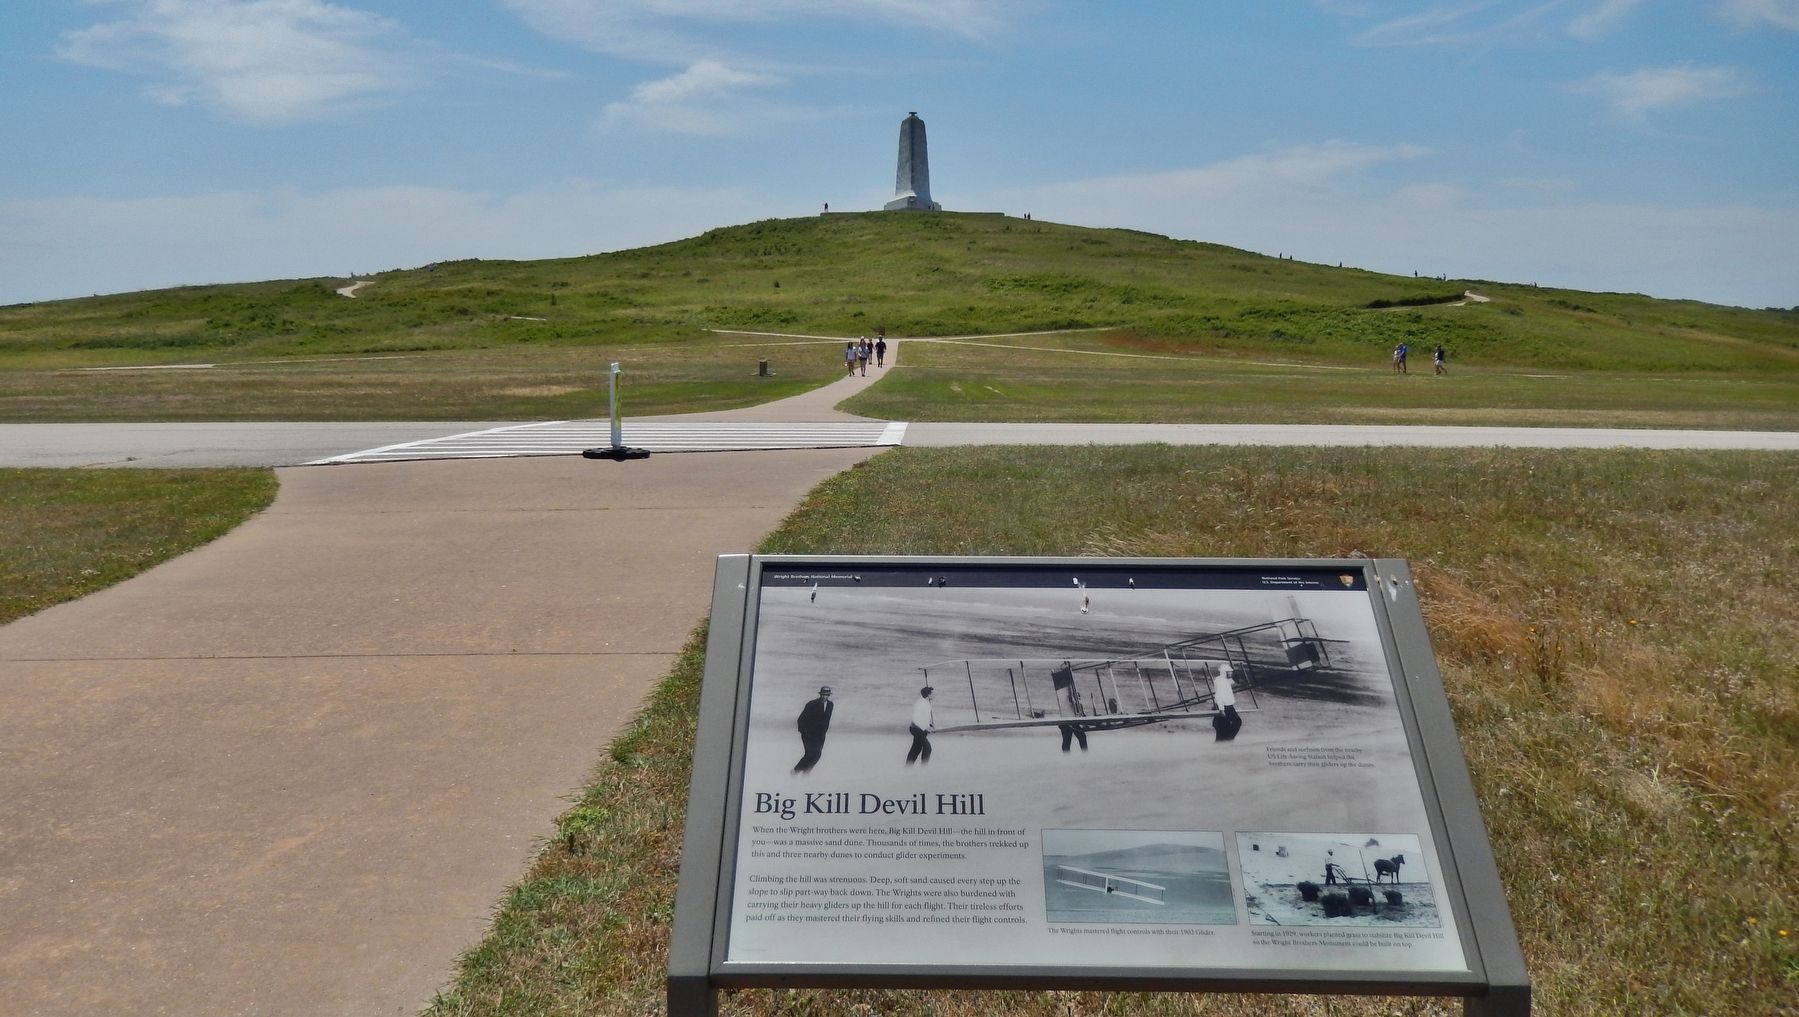 Big Kill Devil Hill Marker (<i>wide view; hill in backround beyond marker</i>) image. Click for full size.